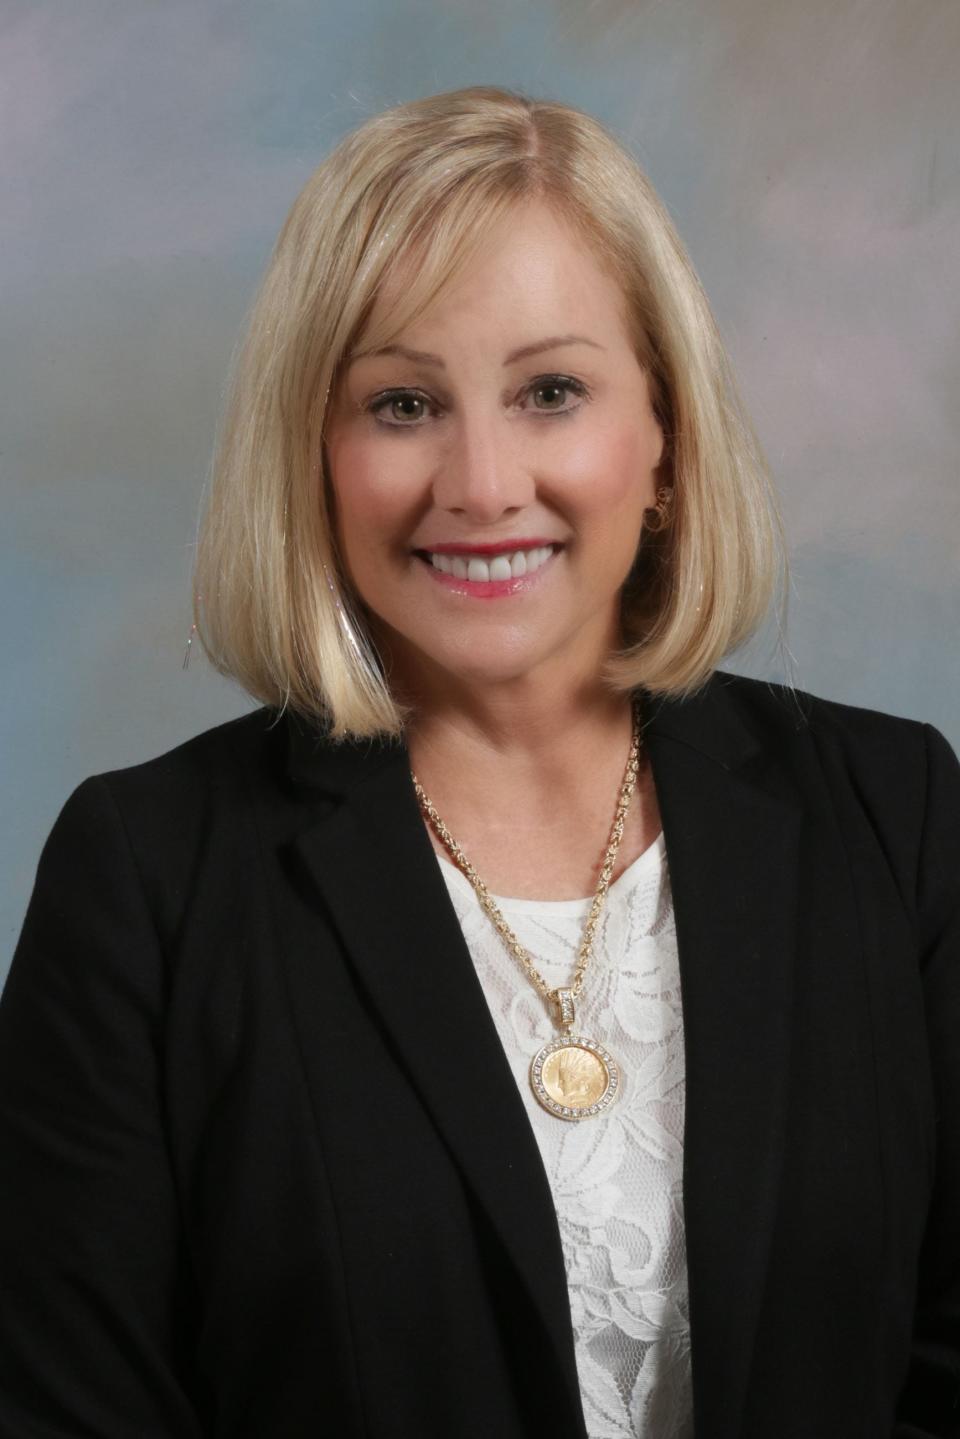 Susan Persis, candidate for Ormond Beach mayor.